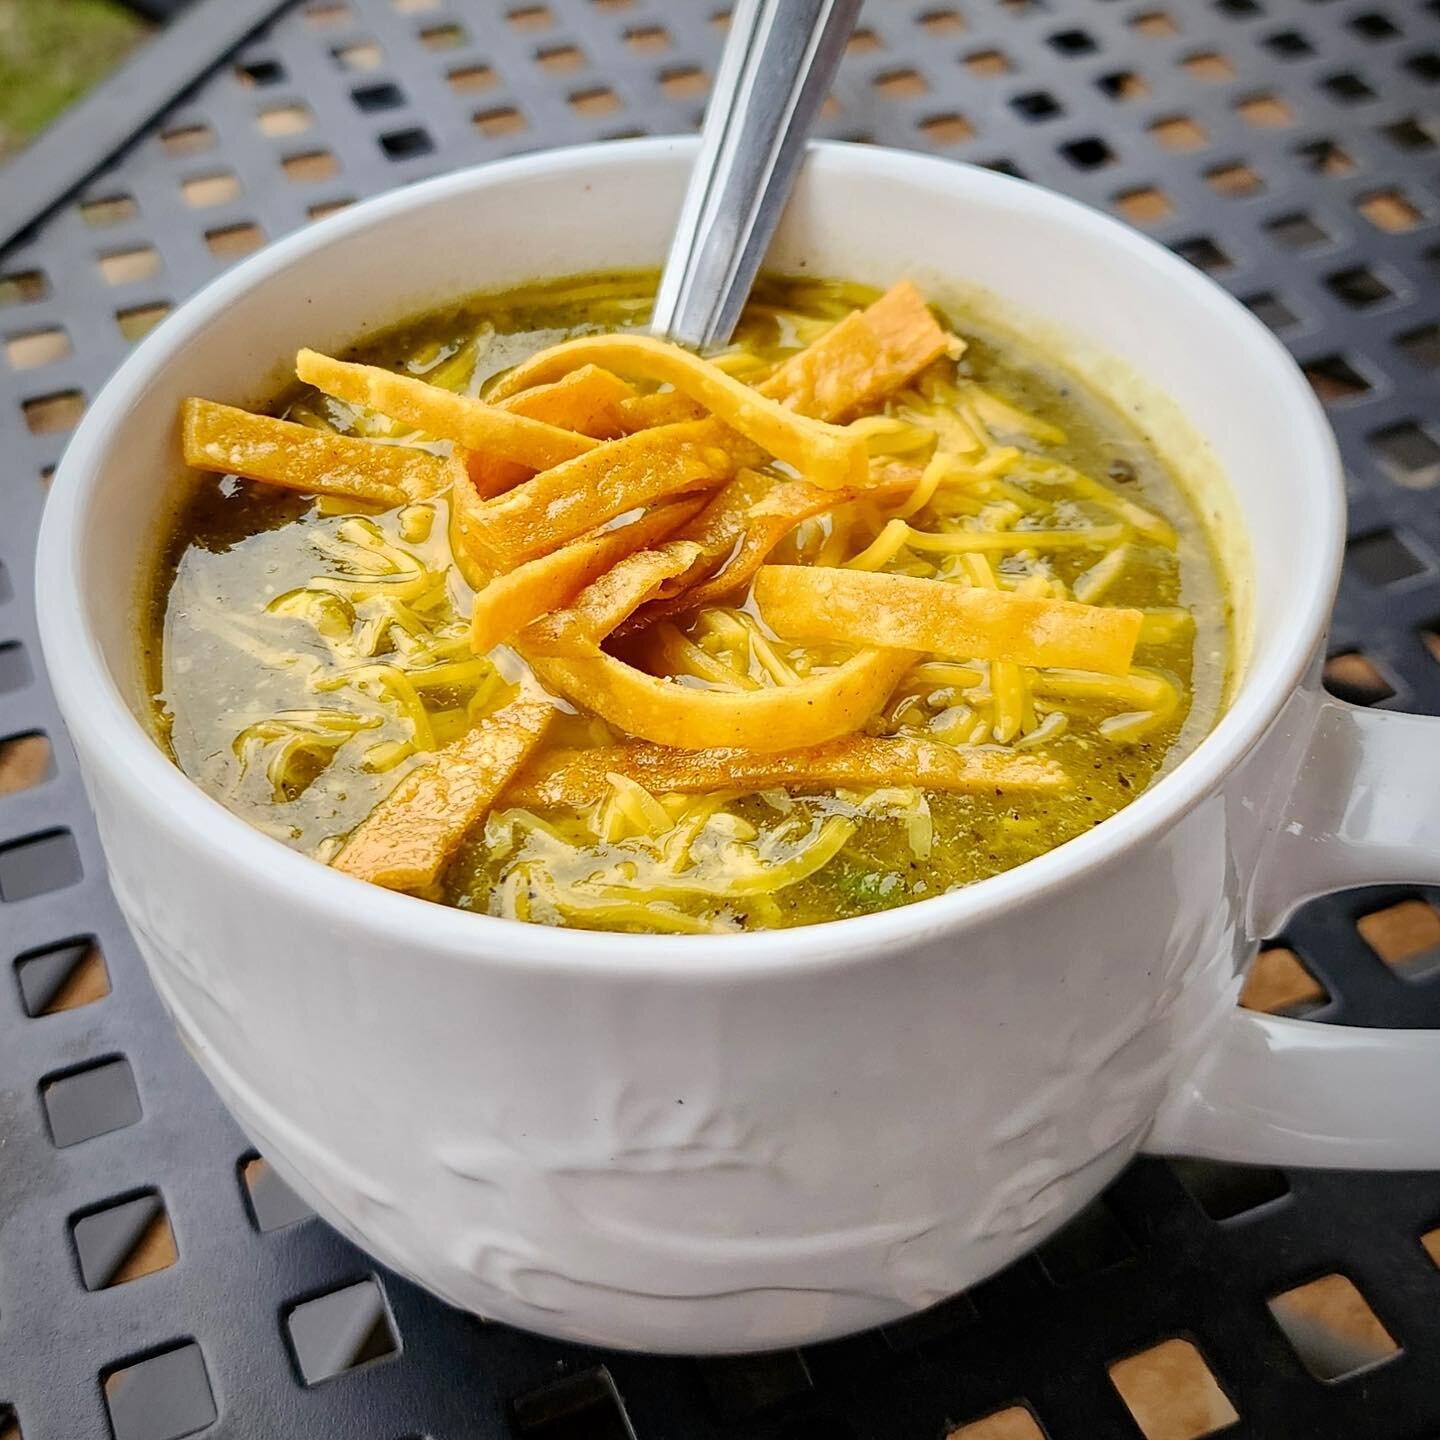 ✨Green Chile Tortilla Soup✨
Tender, shredded chicken in a perfectly spiced green chile broth, topped with crispy tortilla strips and shredded cheese! The perfect cozy soup for rainy days, the soup of the week is our Green Chile Tortilla Soup 🥣 Try i